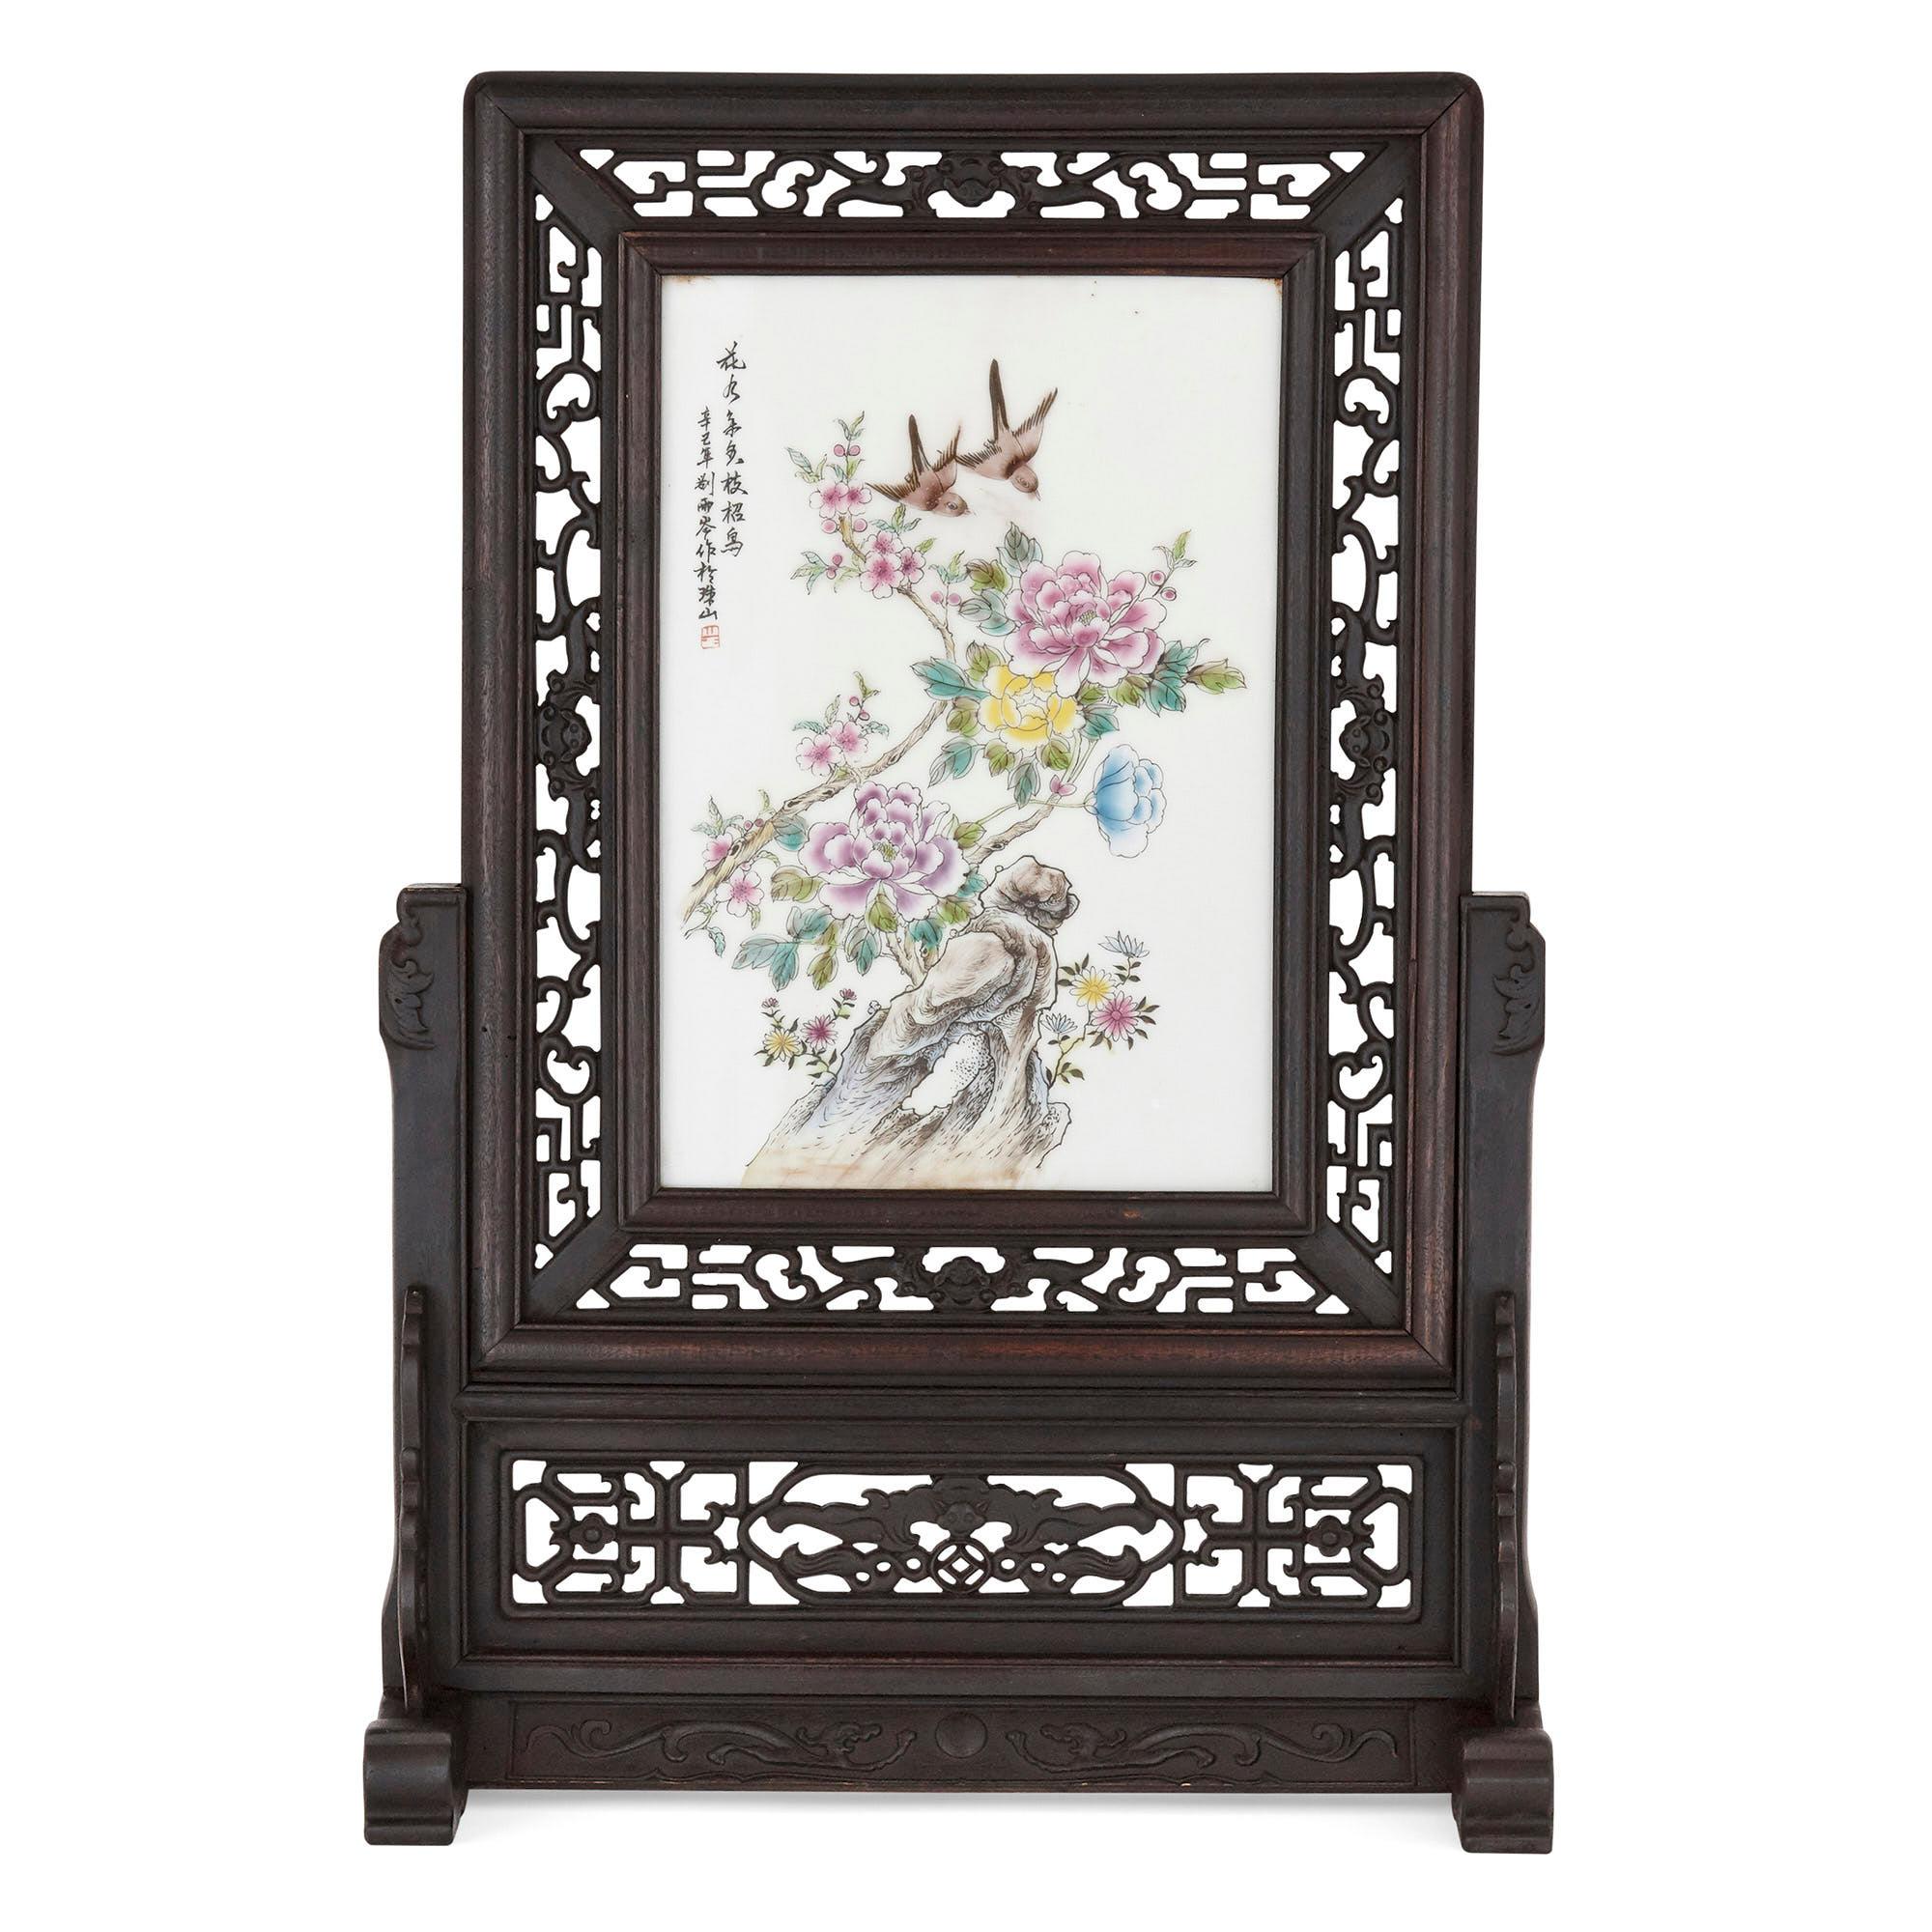 This exquisite Chinese screen is crafted from Hongmu, a dark rosewood from South East Asia. The ornately carved and pierced frame depicts dragons and scrolling foliate shapes. The central porcelain plaque portrays Chinese style birds and flowers in